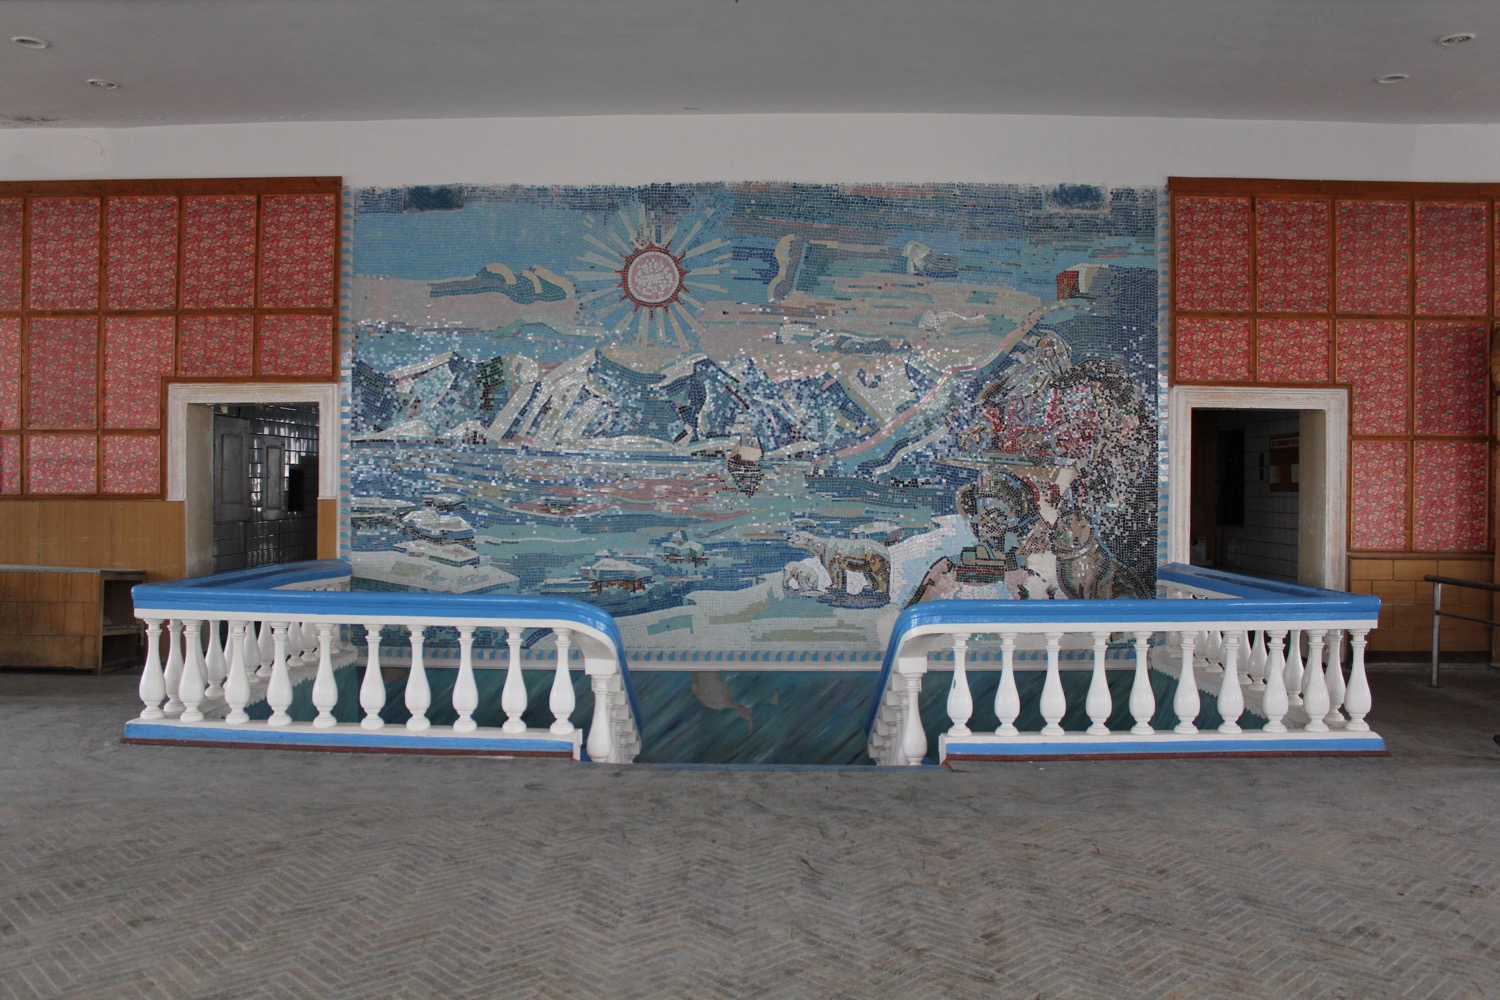 a mosaic wall with a white railing and blue railings